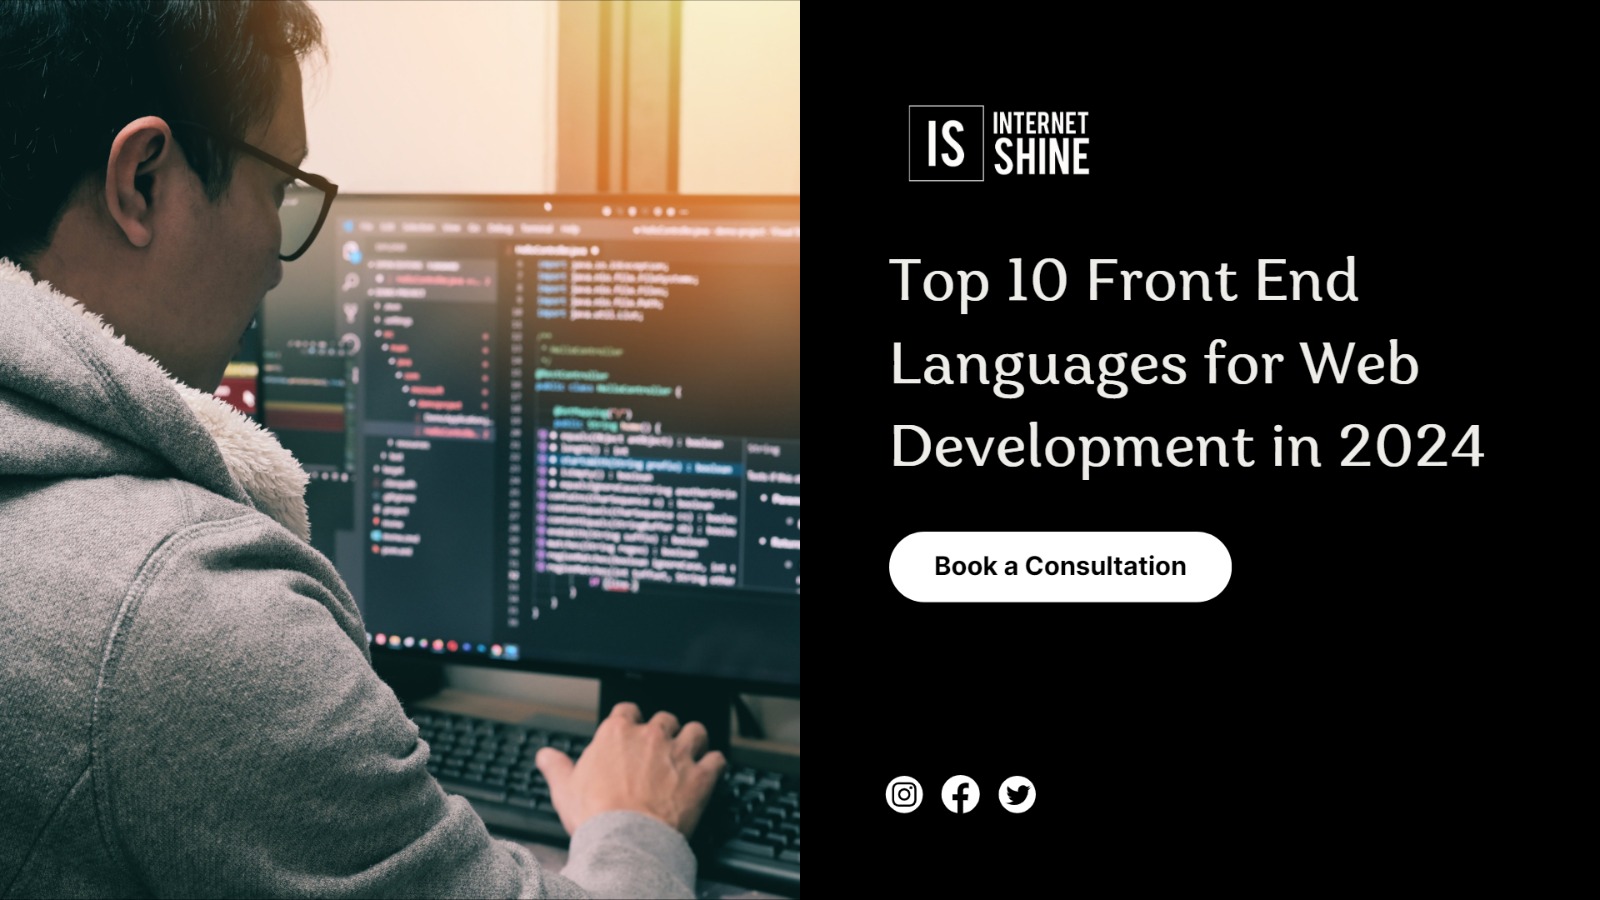 Top 10 Front End Languages for Web Development in 2024